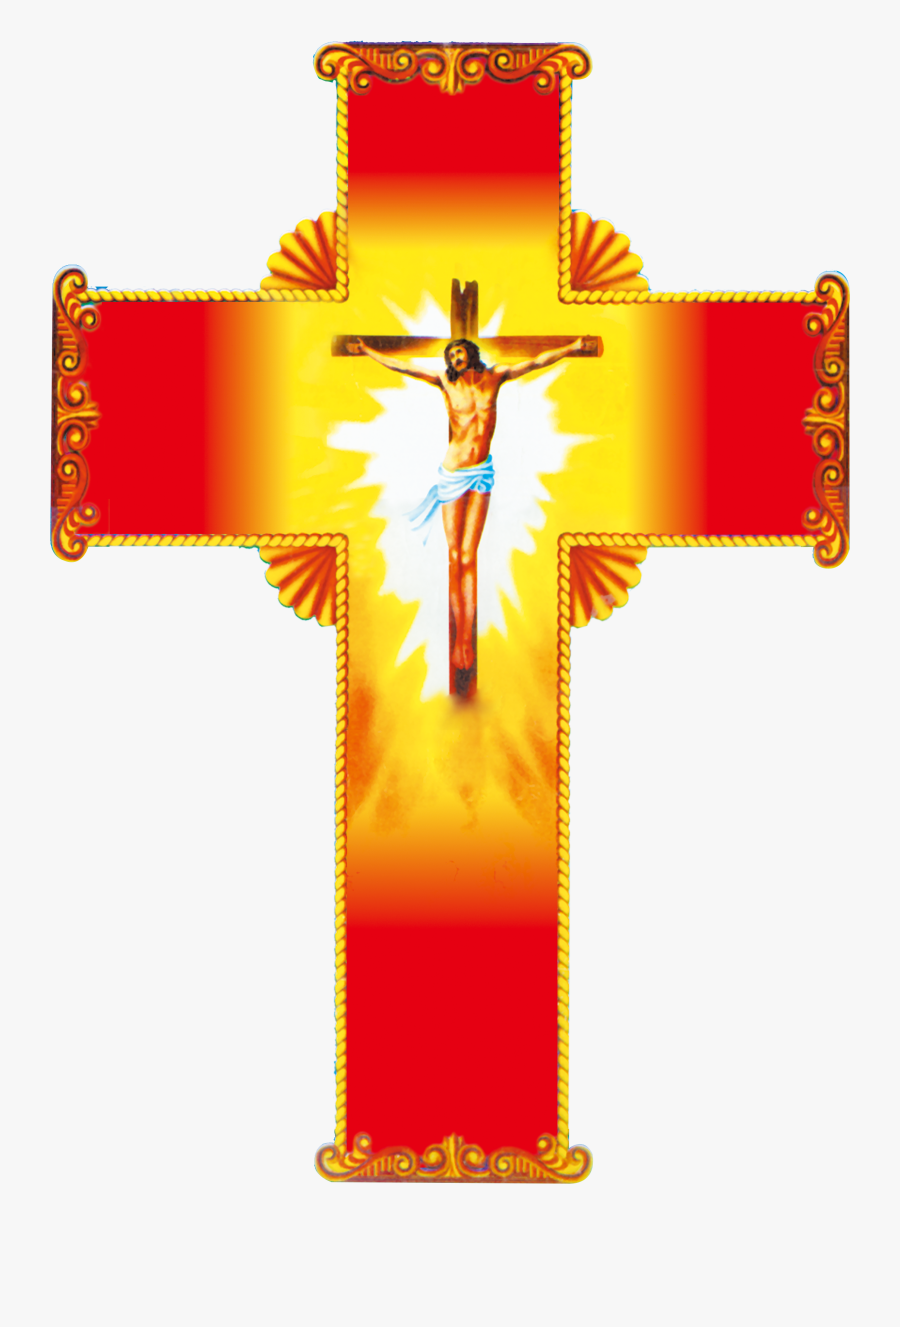 Christian Red Jesus Material - Jesus Cross Hd Images Png, Transparent Clipart